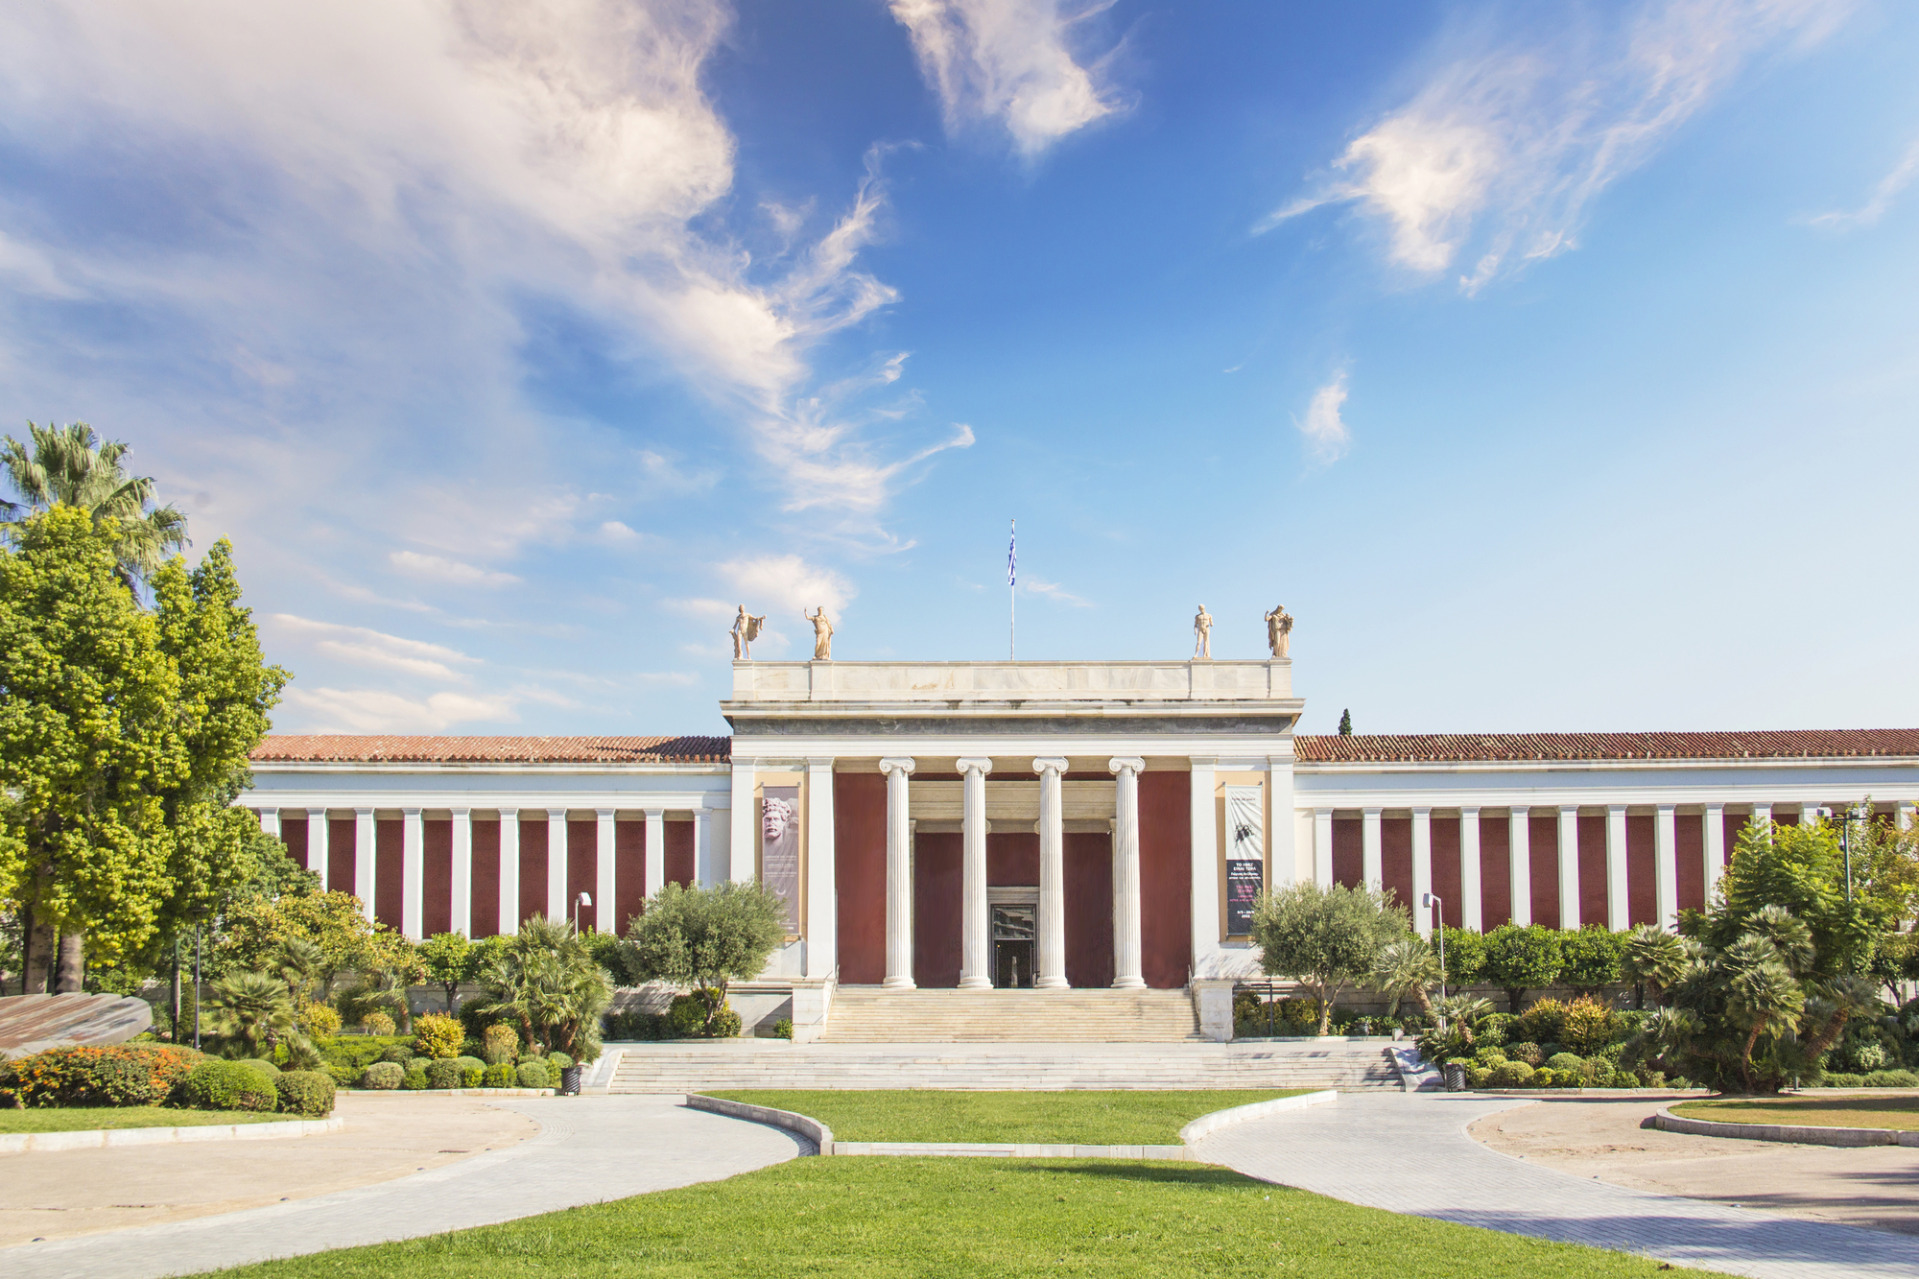 Museums in Greece